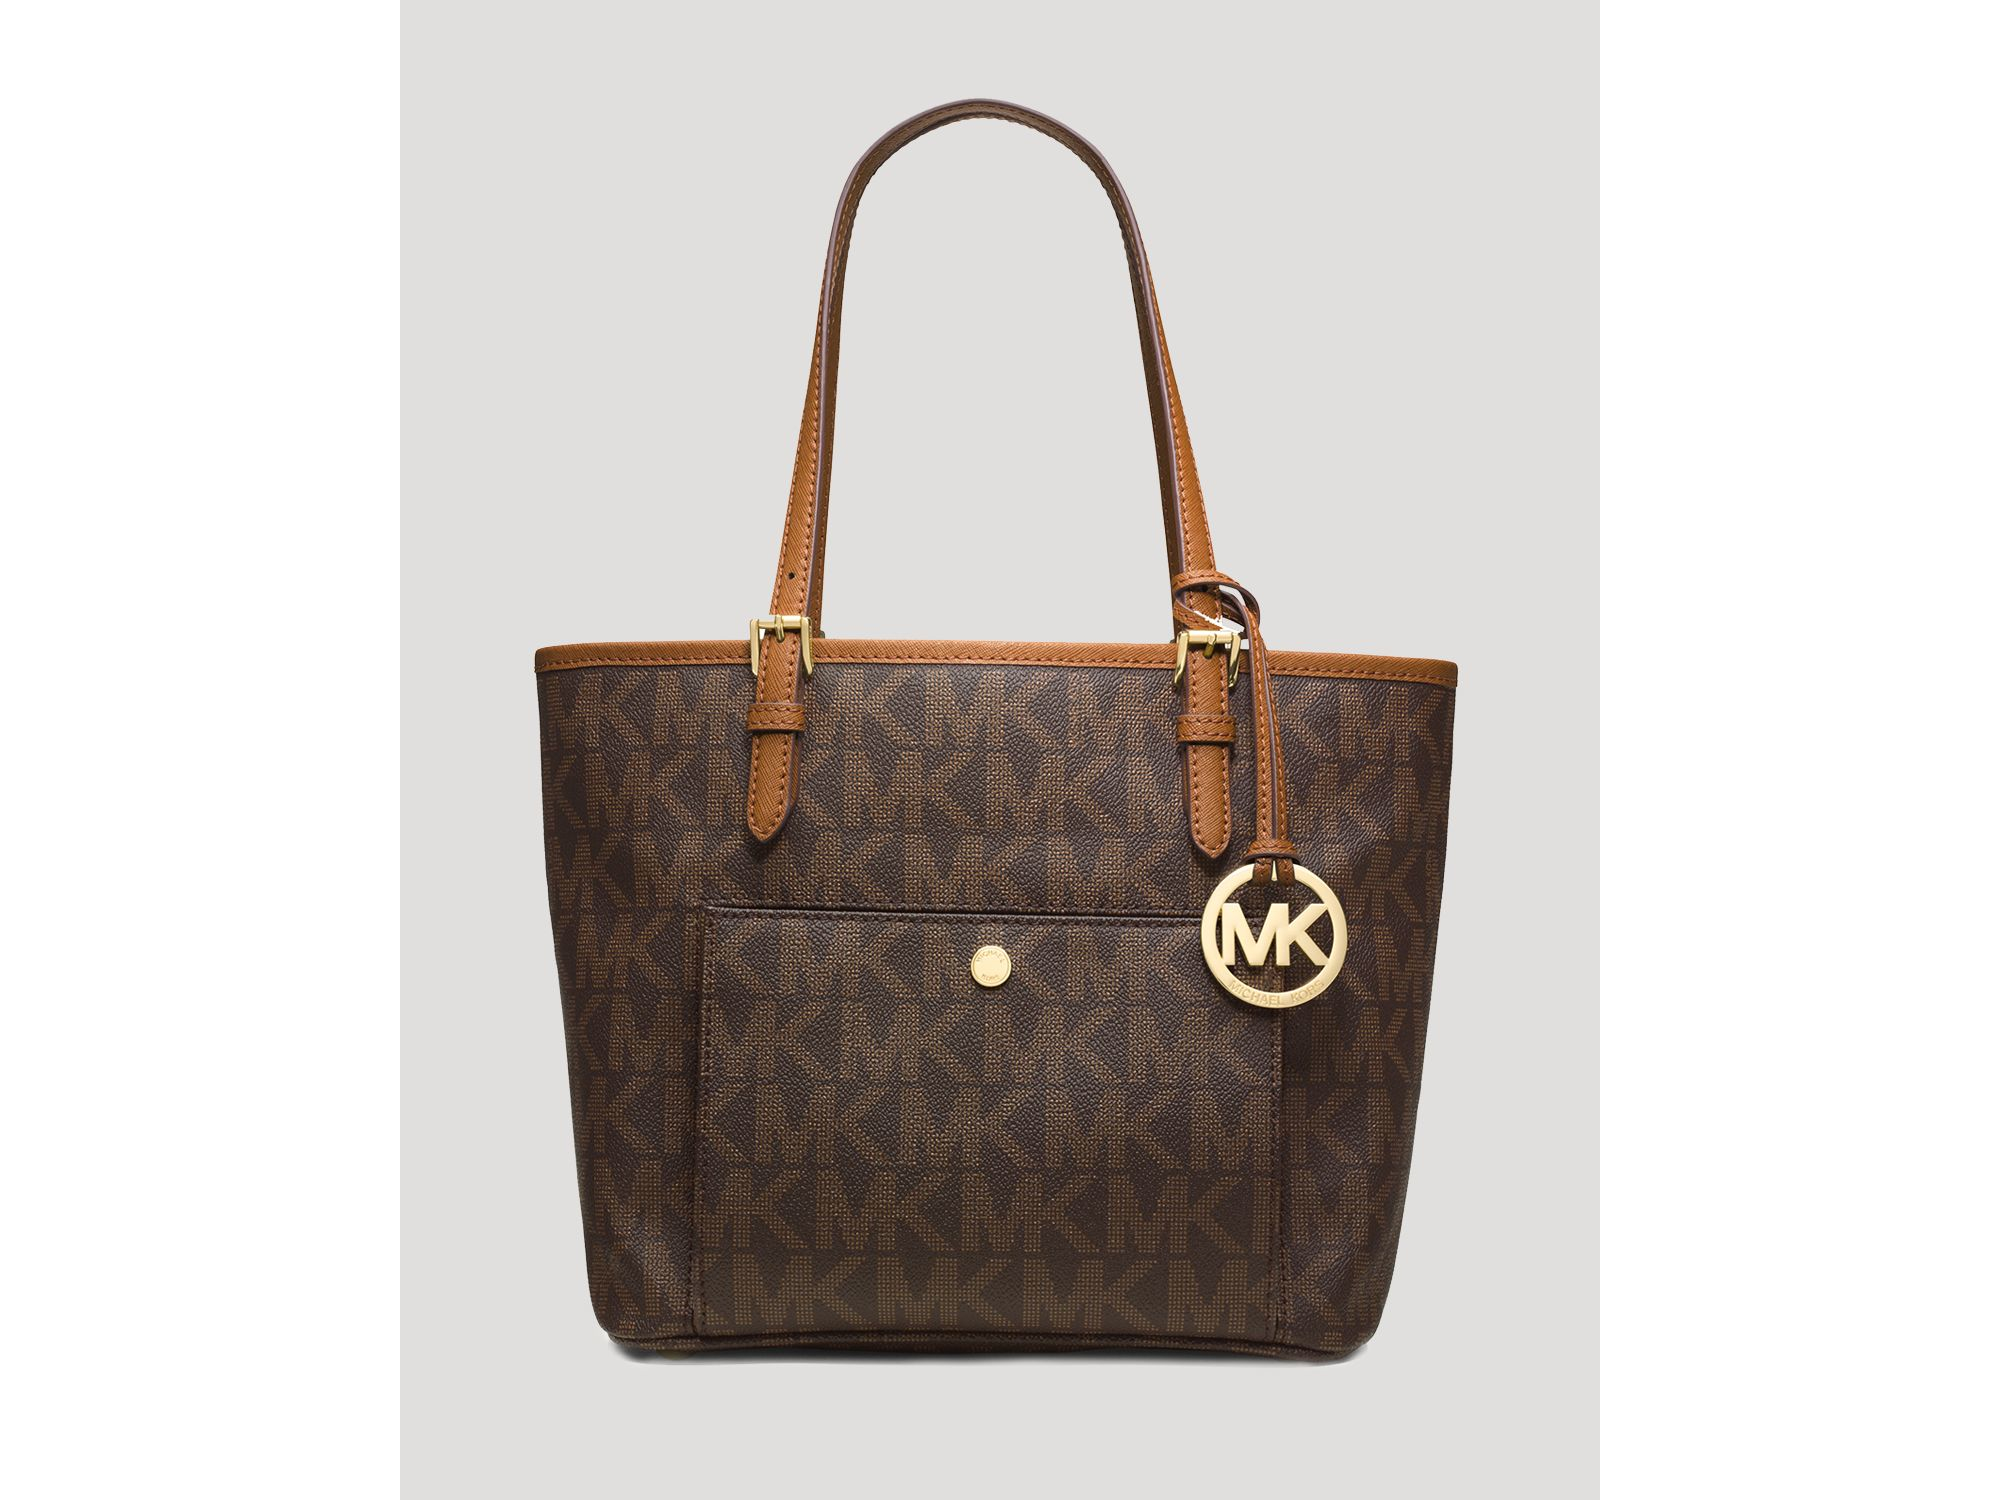 MICHAEL Michael Kors Jet Set Snap Pocket Tote In White Lyst Canada